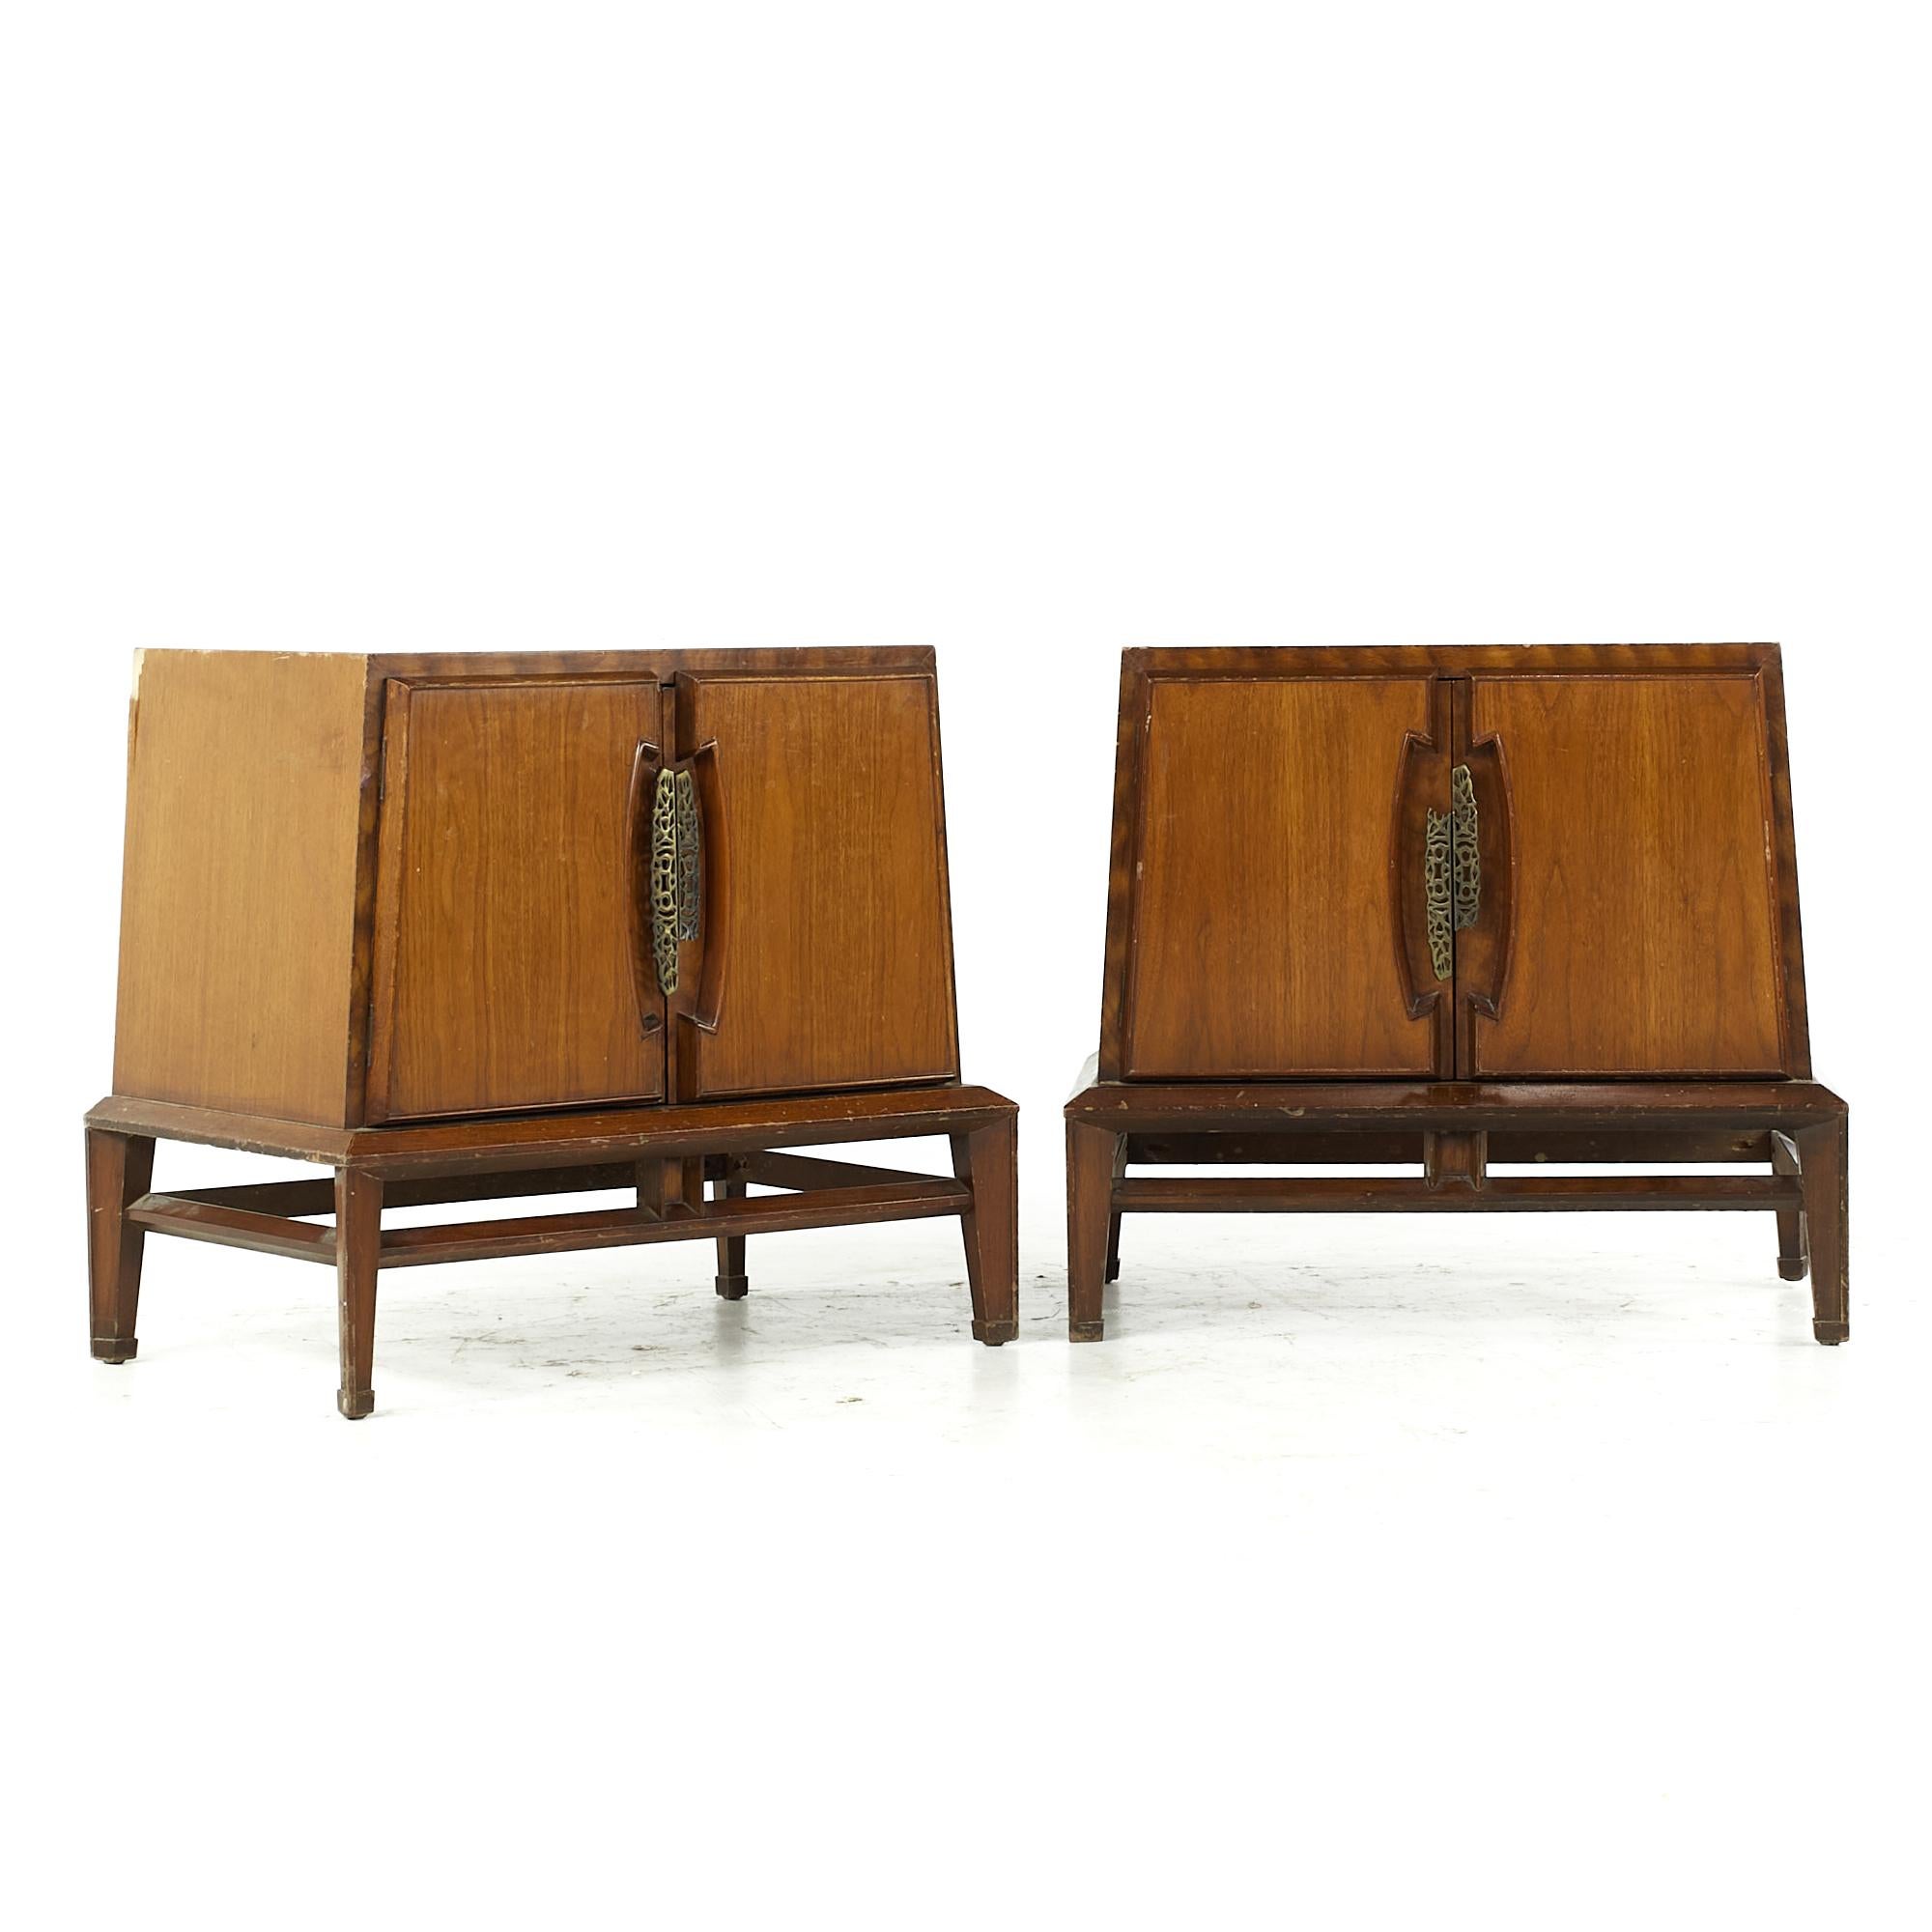 Helen Hobey Baker midcentury Walnut Nightstands - Pair

Each nightstand measures: 28 wide x 18 deep x 25 inches high

All pieces of furniture can be had in what we call restored vintage condition. That means the piece is restored upon purchase